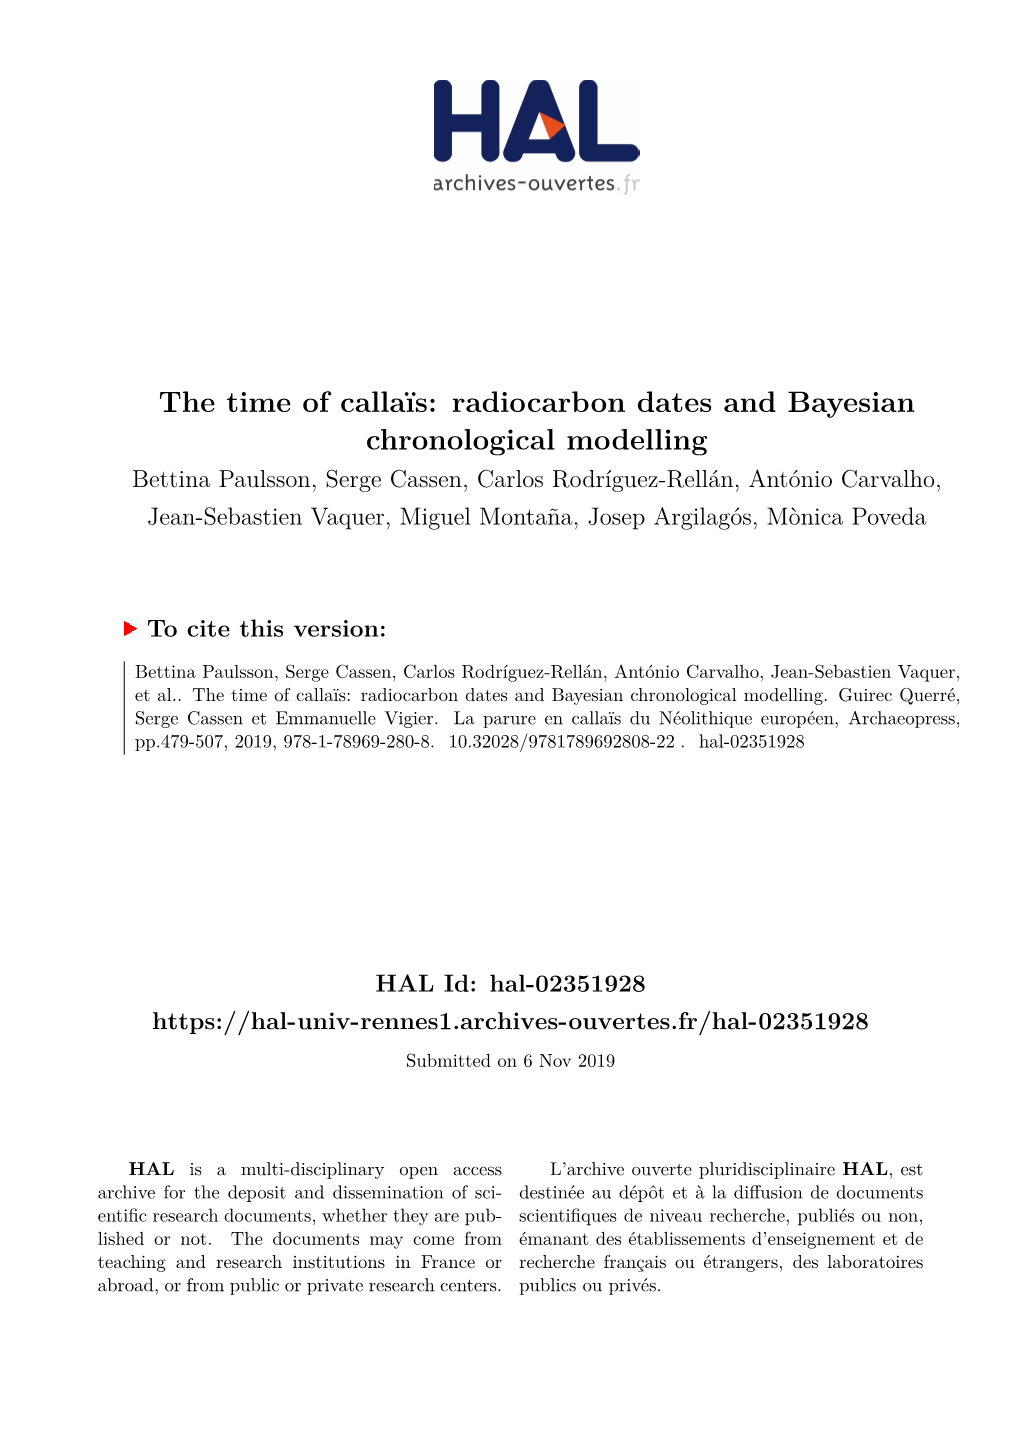 Radiocarbon Dates and Bayesian Chronological Modelling